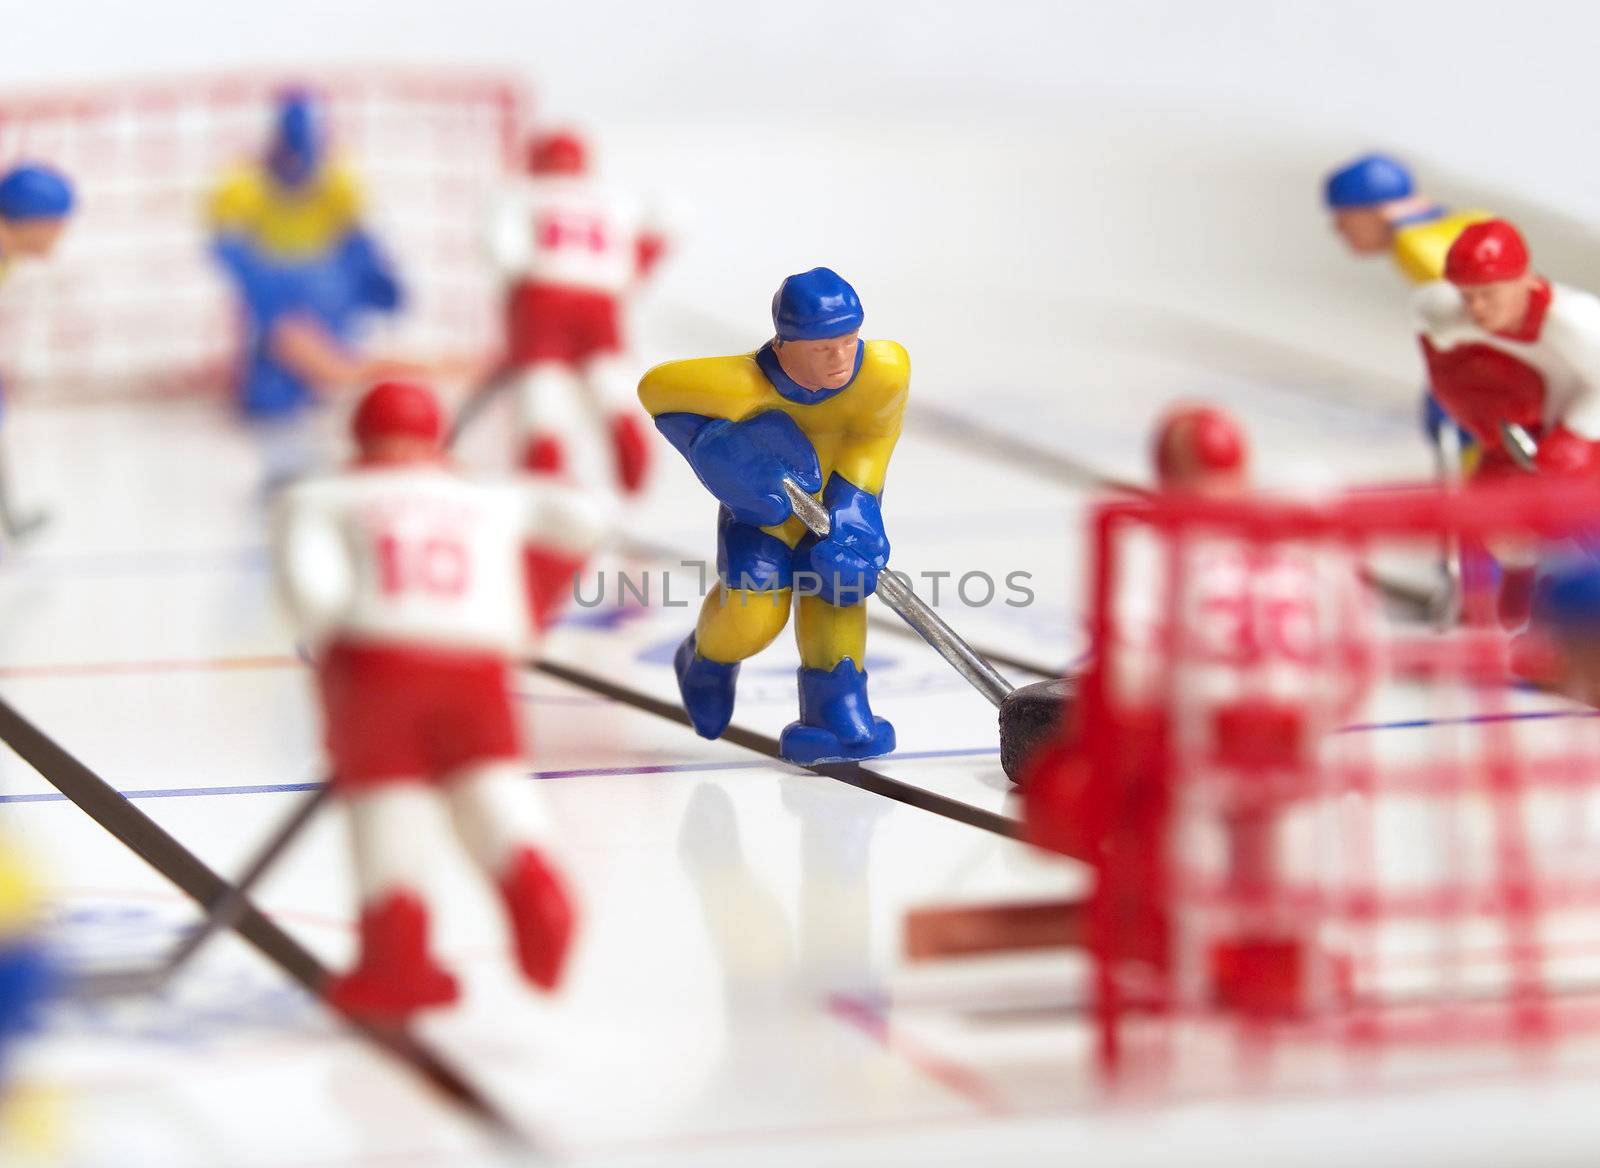 Hockey game with selective focus